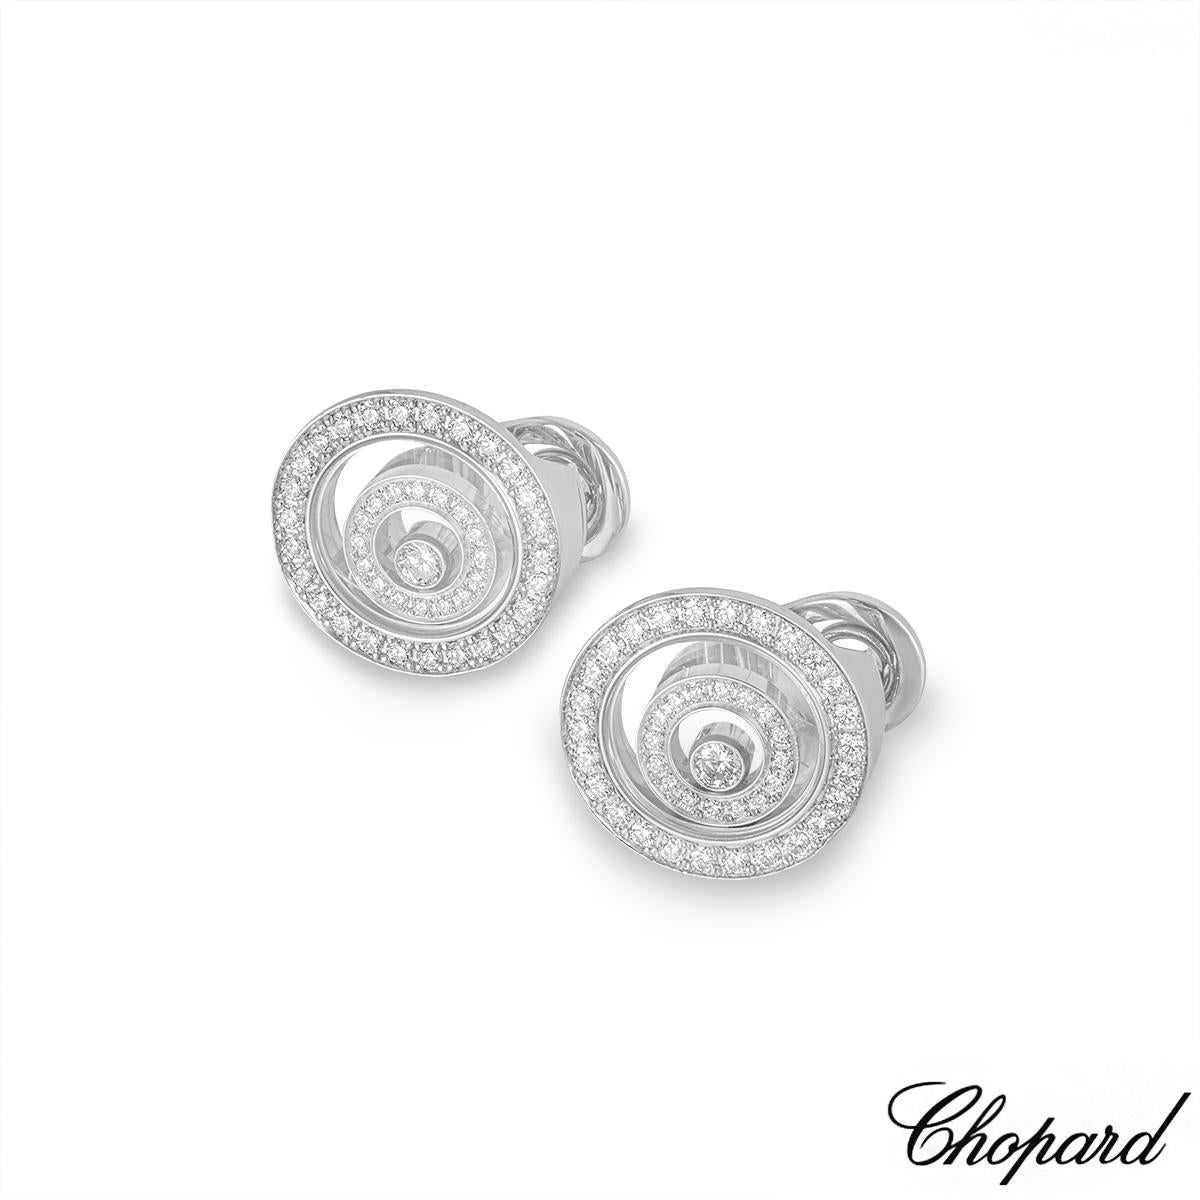 A sparkly pair of 18k white gold diamond earrings by Chopard from the Happy Spirit collection. The earrings are each set with a single floating round brilliant cut diamond inside a freely moving round talisman, pave set with 16 round brilliant cut